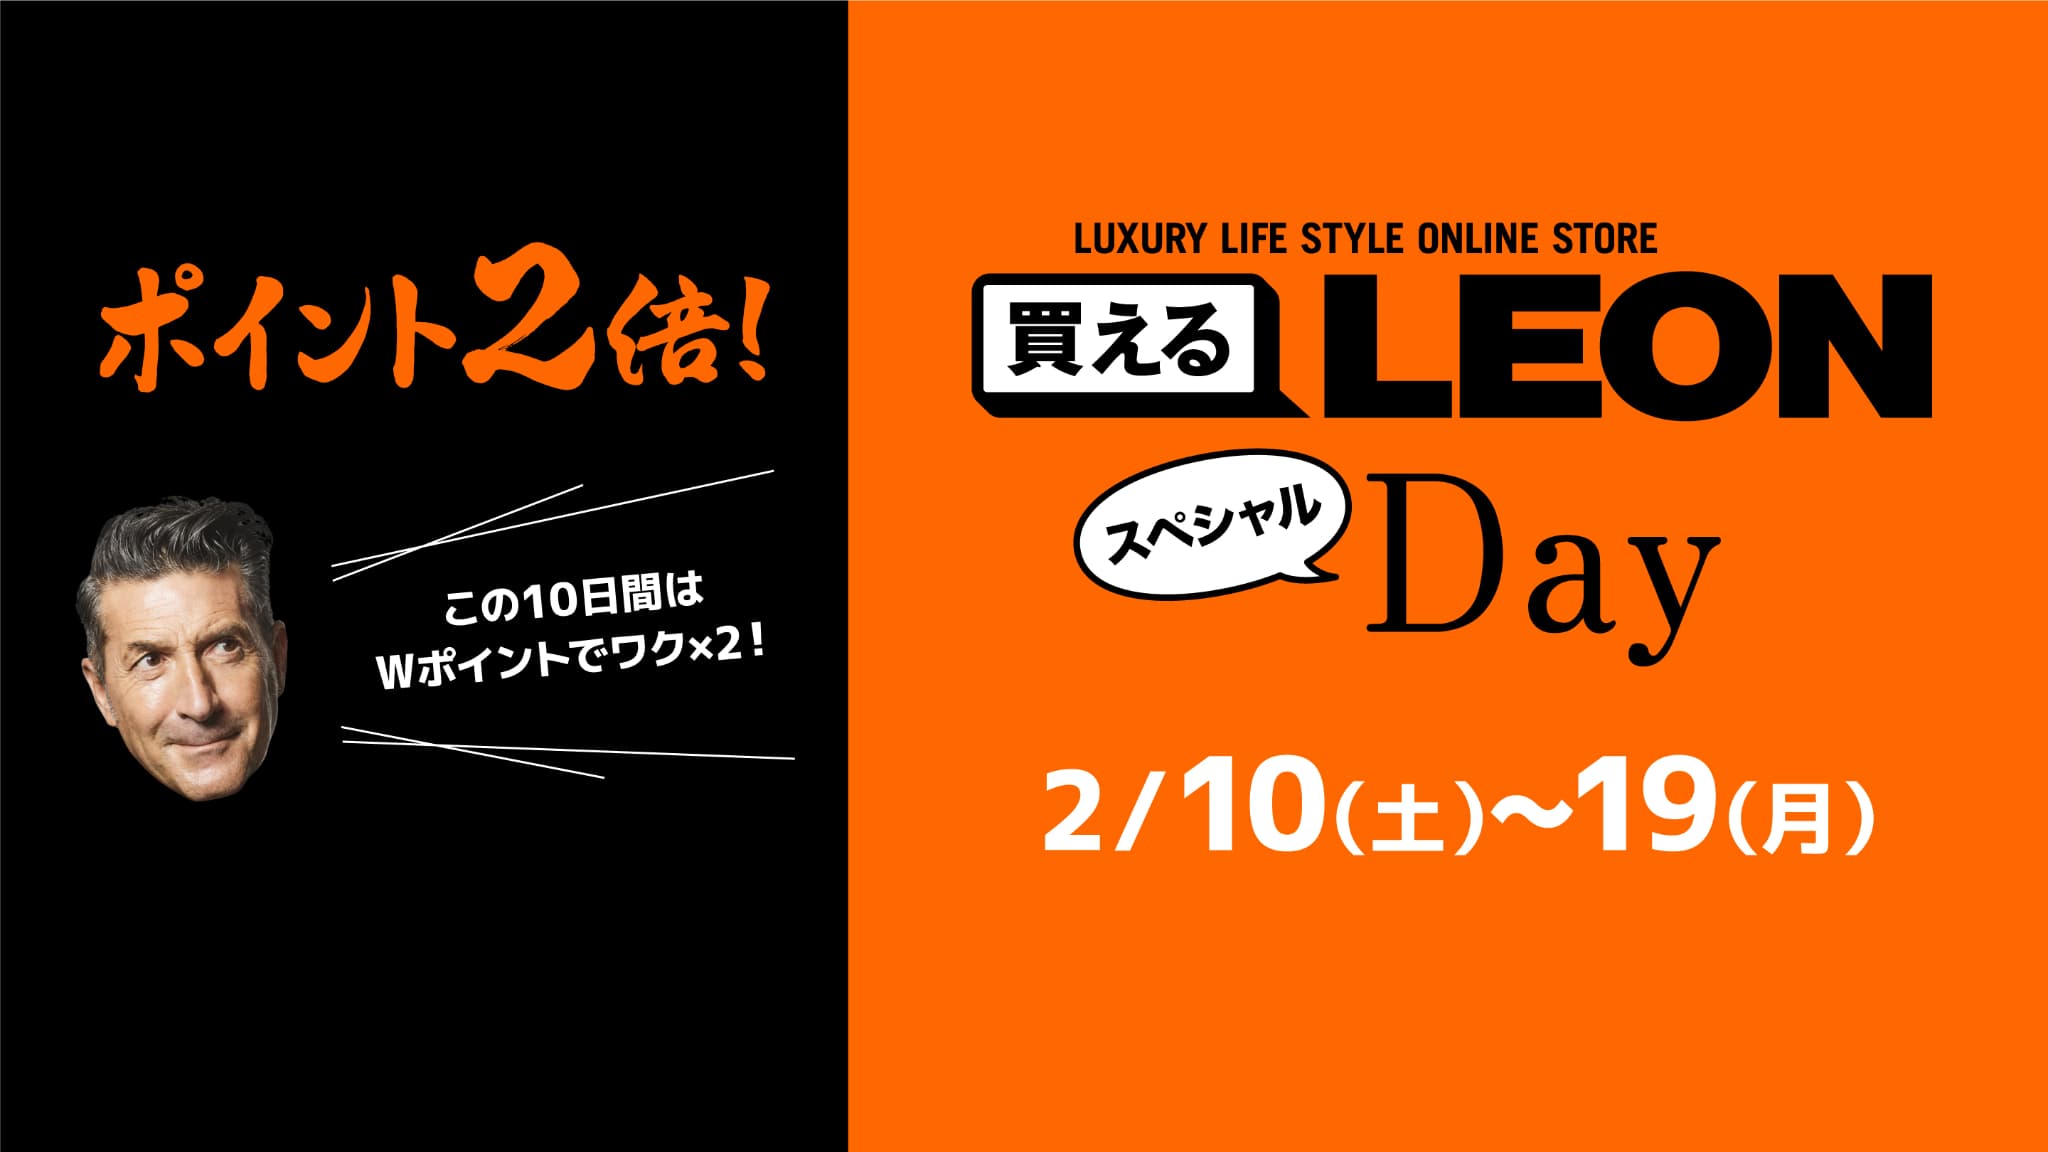 Double points campaign for all members for 10 days only! Additionally, new members will receive a ¥1,000 OFF coupon!